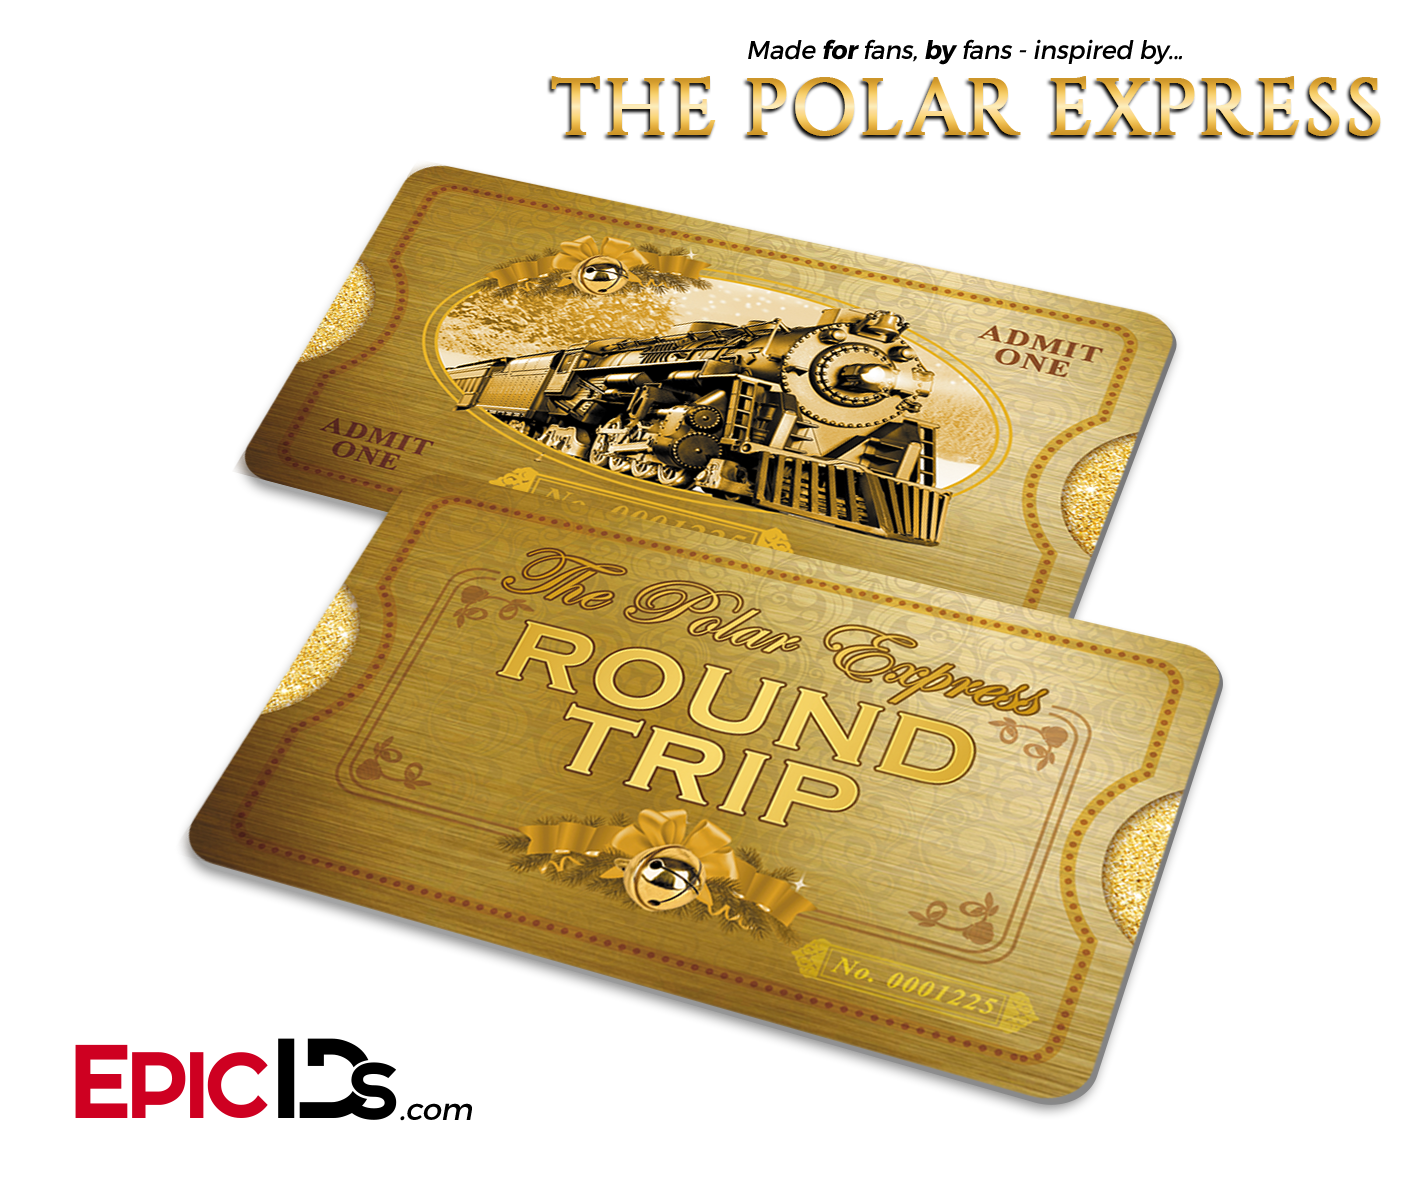 The Polar Express Inspired North Pole Train Ticket (Card) - Epic IDs